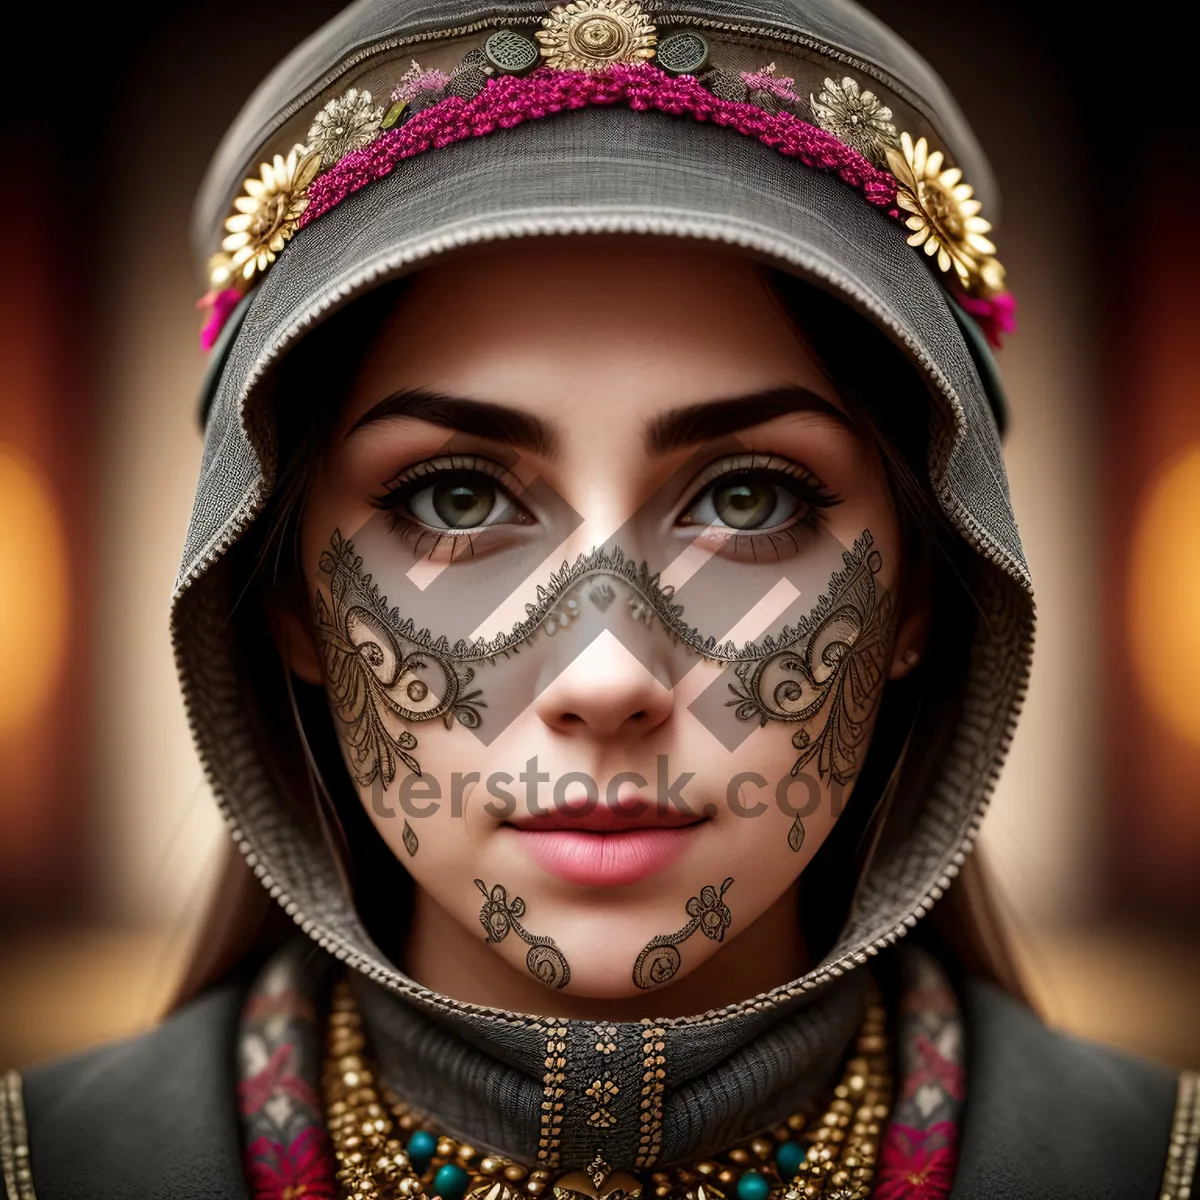 Picture of Enigmatic Femme Fatale: Alluring Masked Portrait in Fashionable Style